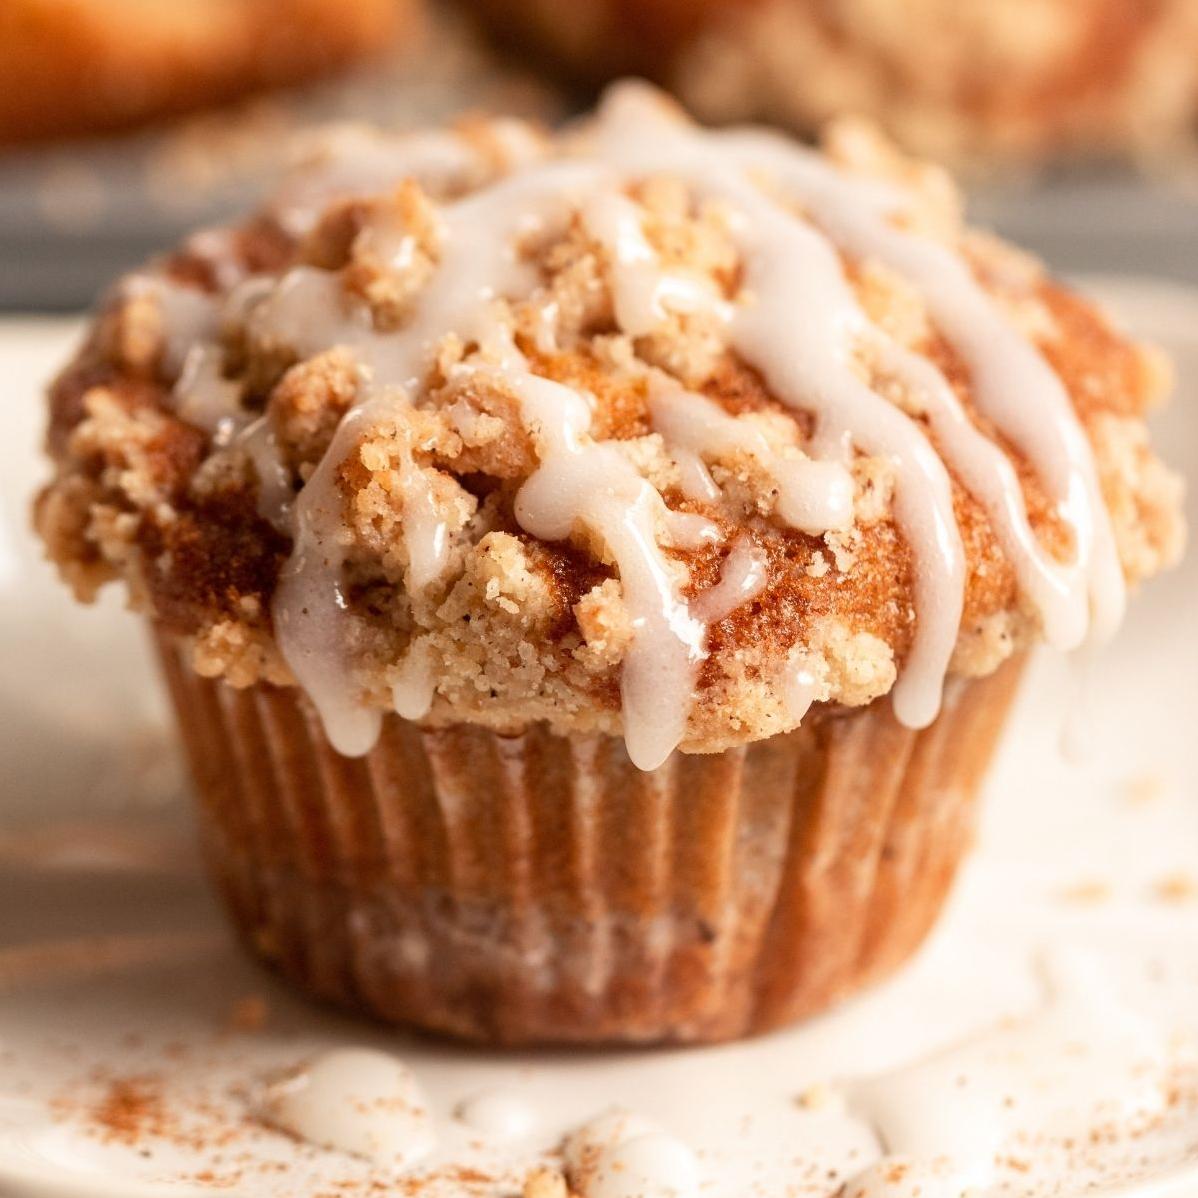  Sweeten up your mornings with these delicious coffee cake muffins!